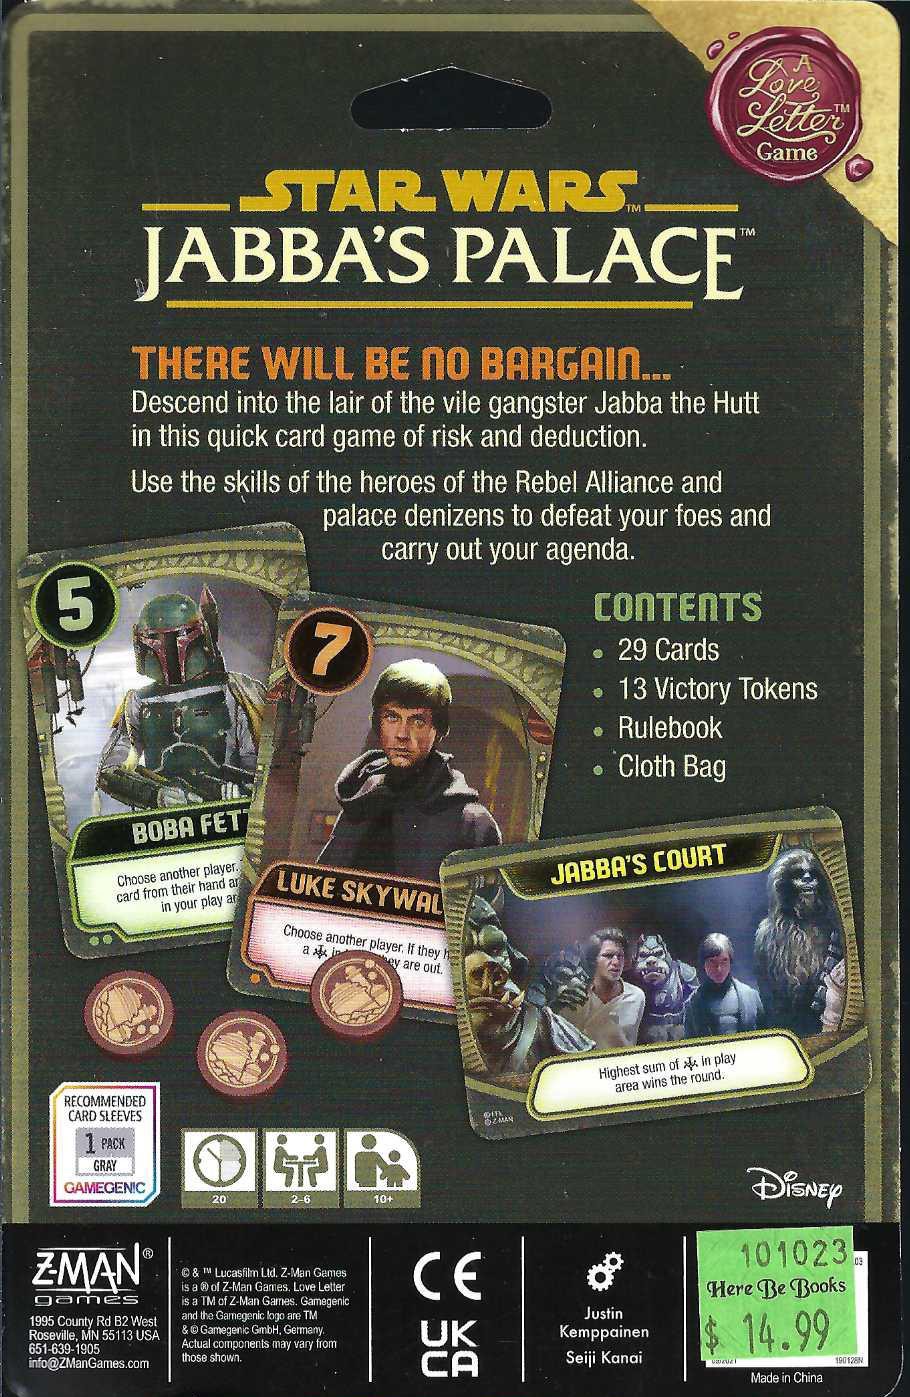 Star Wars Jabba's Palace: a Love Letter game back of package